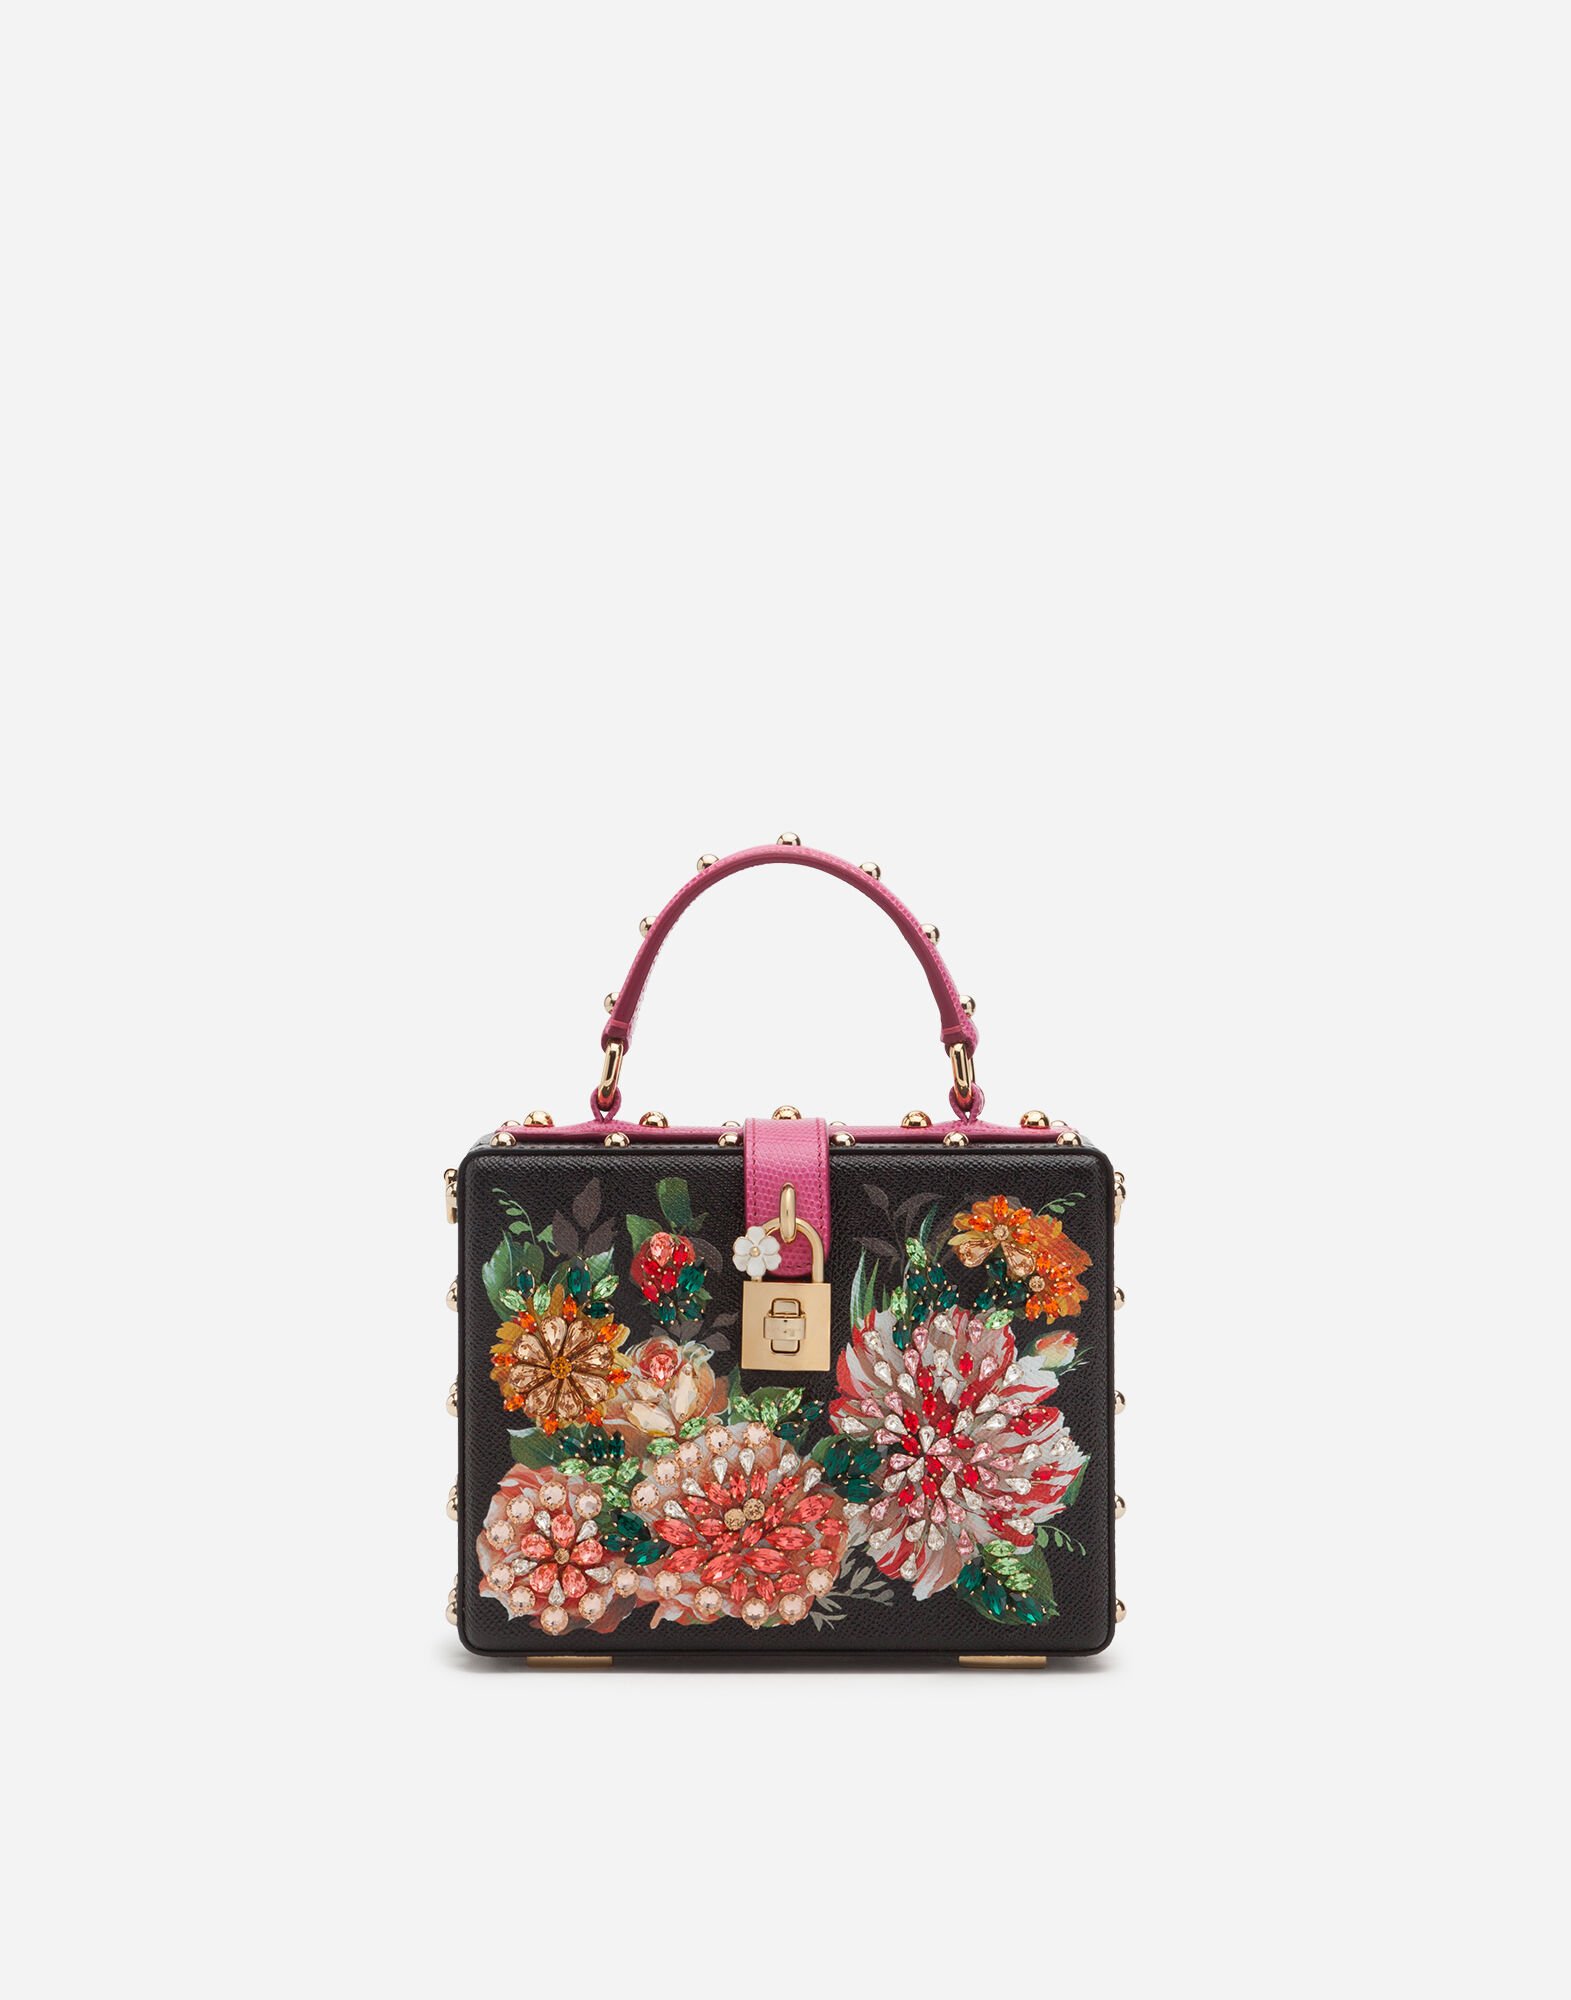 Dolce & Gabbana Dolce Box bag in printed dauphine calfskin with embroidery Multicolor BB5970AY229